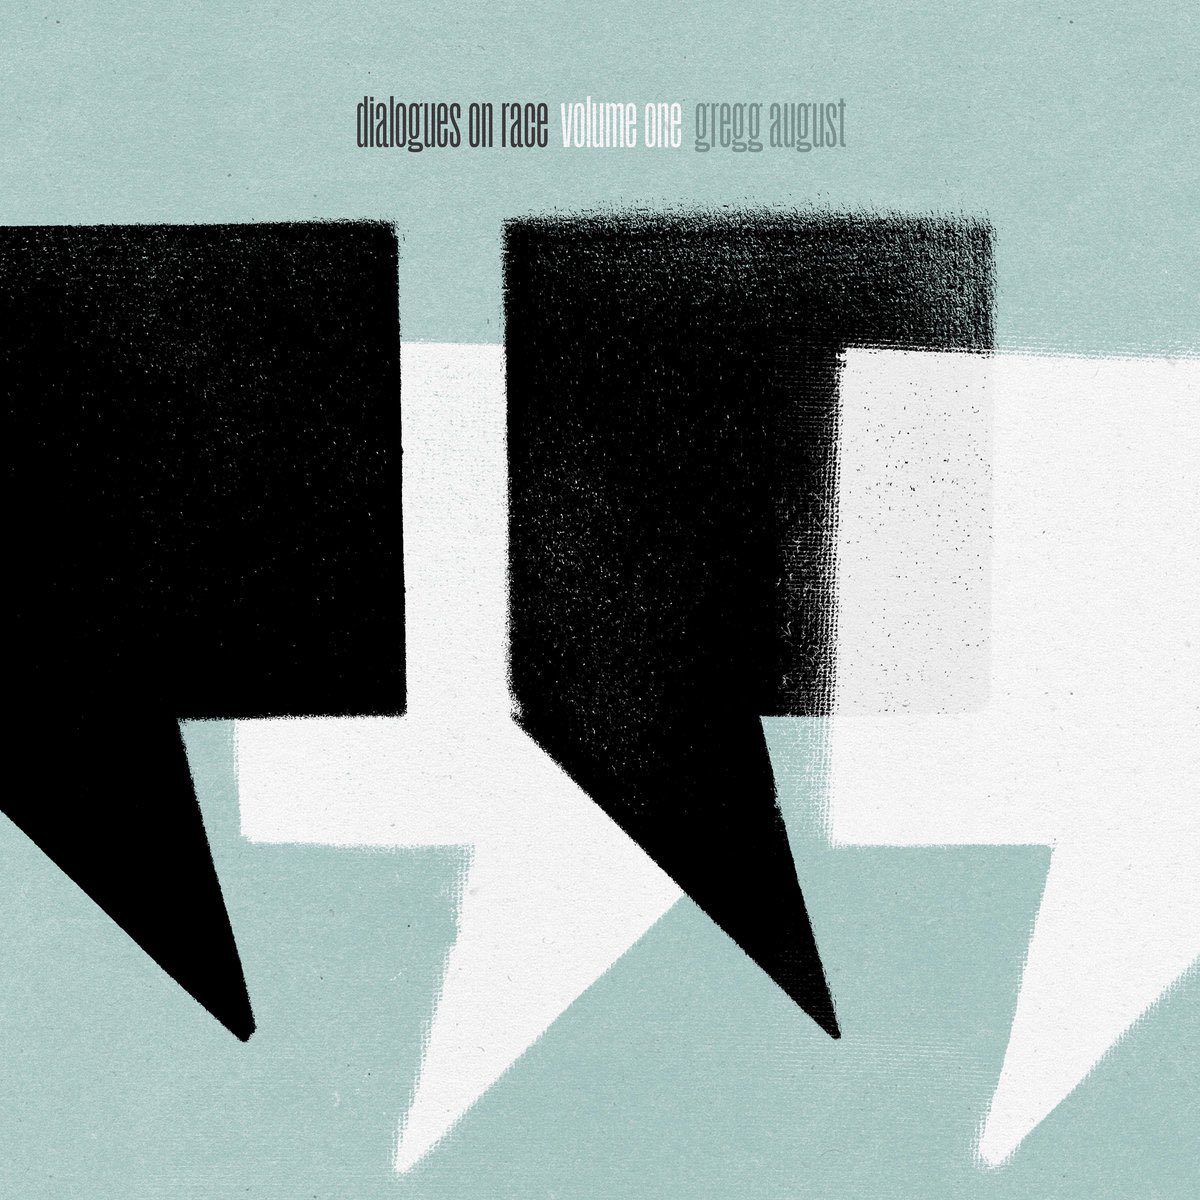 1. Gregg August - Dialogues on Race: Volume One (hard hitting, topical jazz record that isn’t too far out to get into, but still challenges the listener. Headphone, uninterrupted listening reveals a perfect record. A masterpiece.